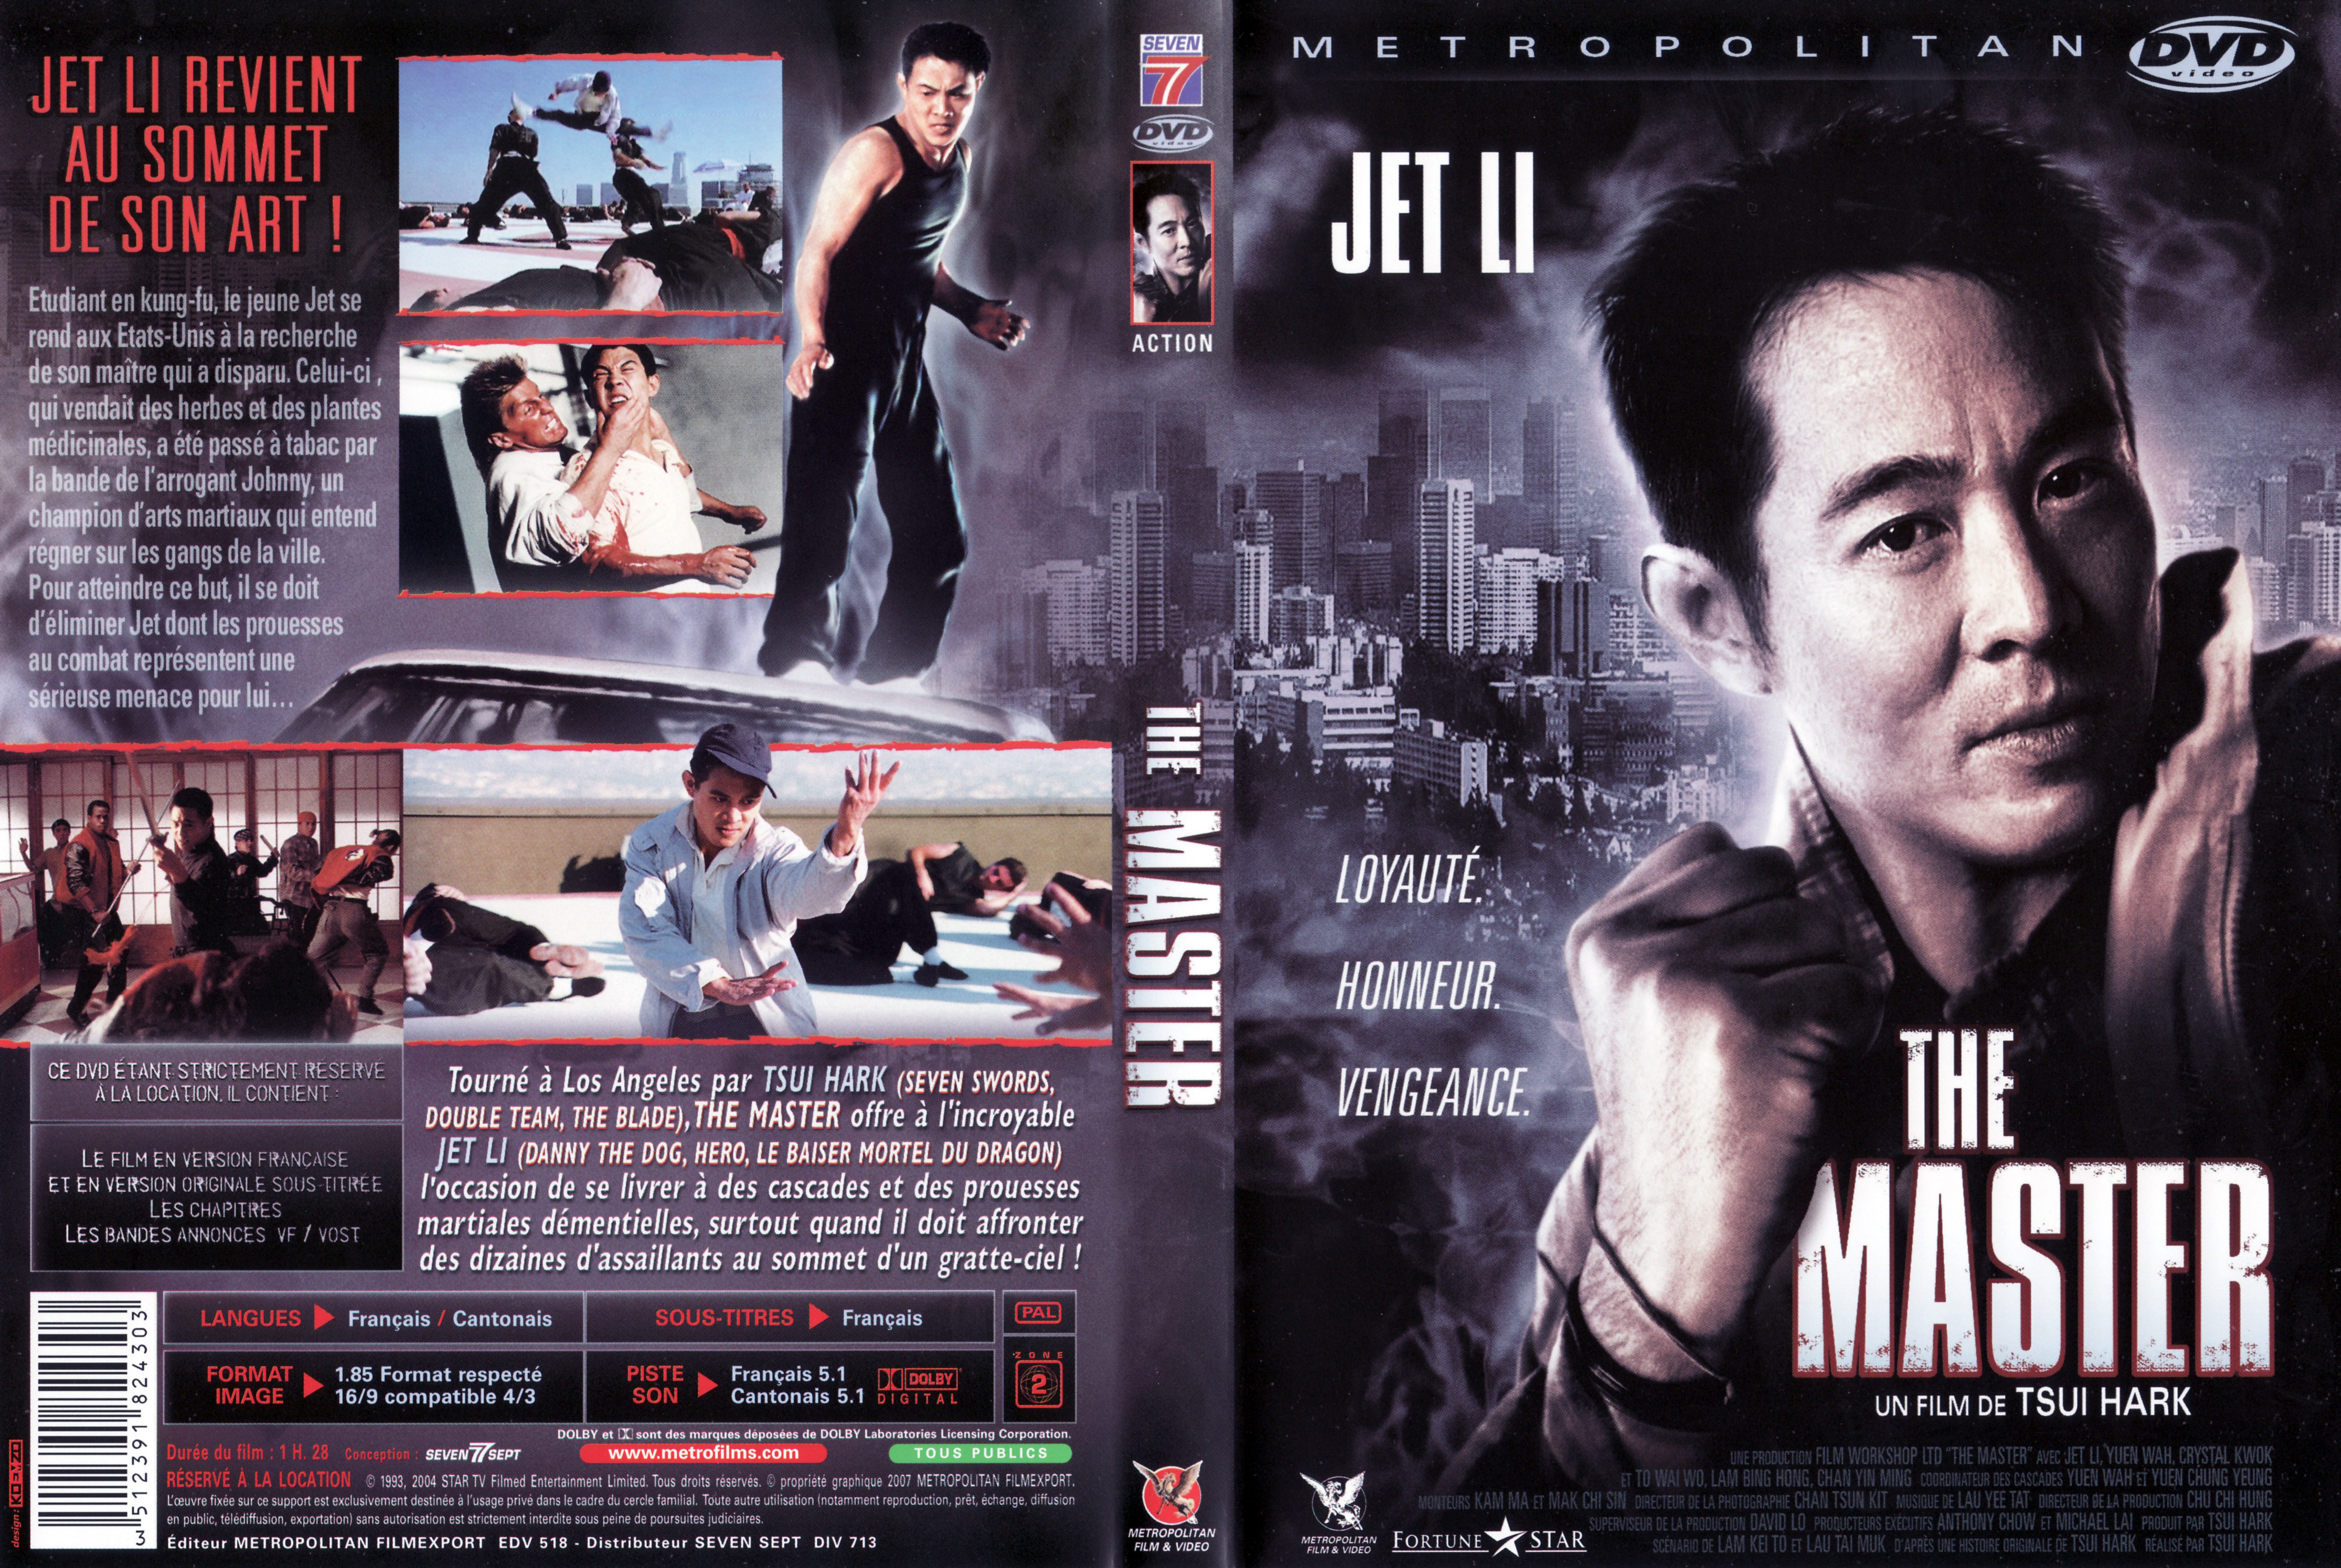 Jaquette DVD The master